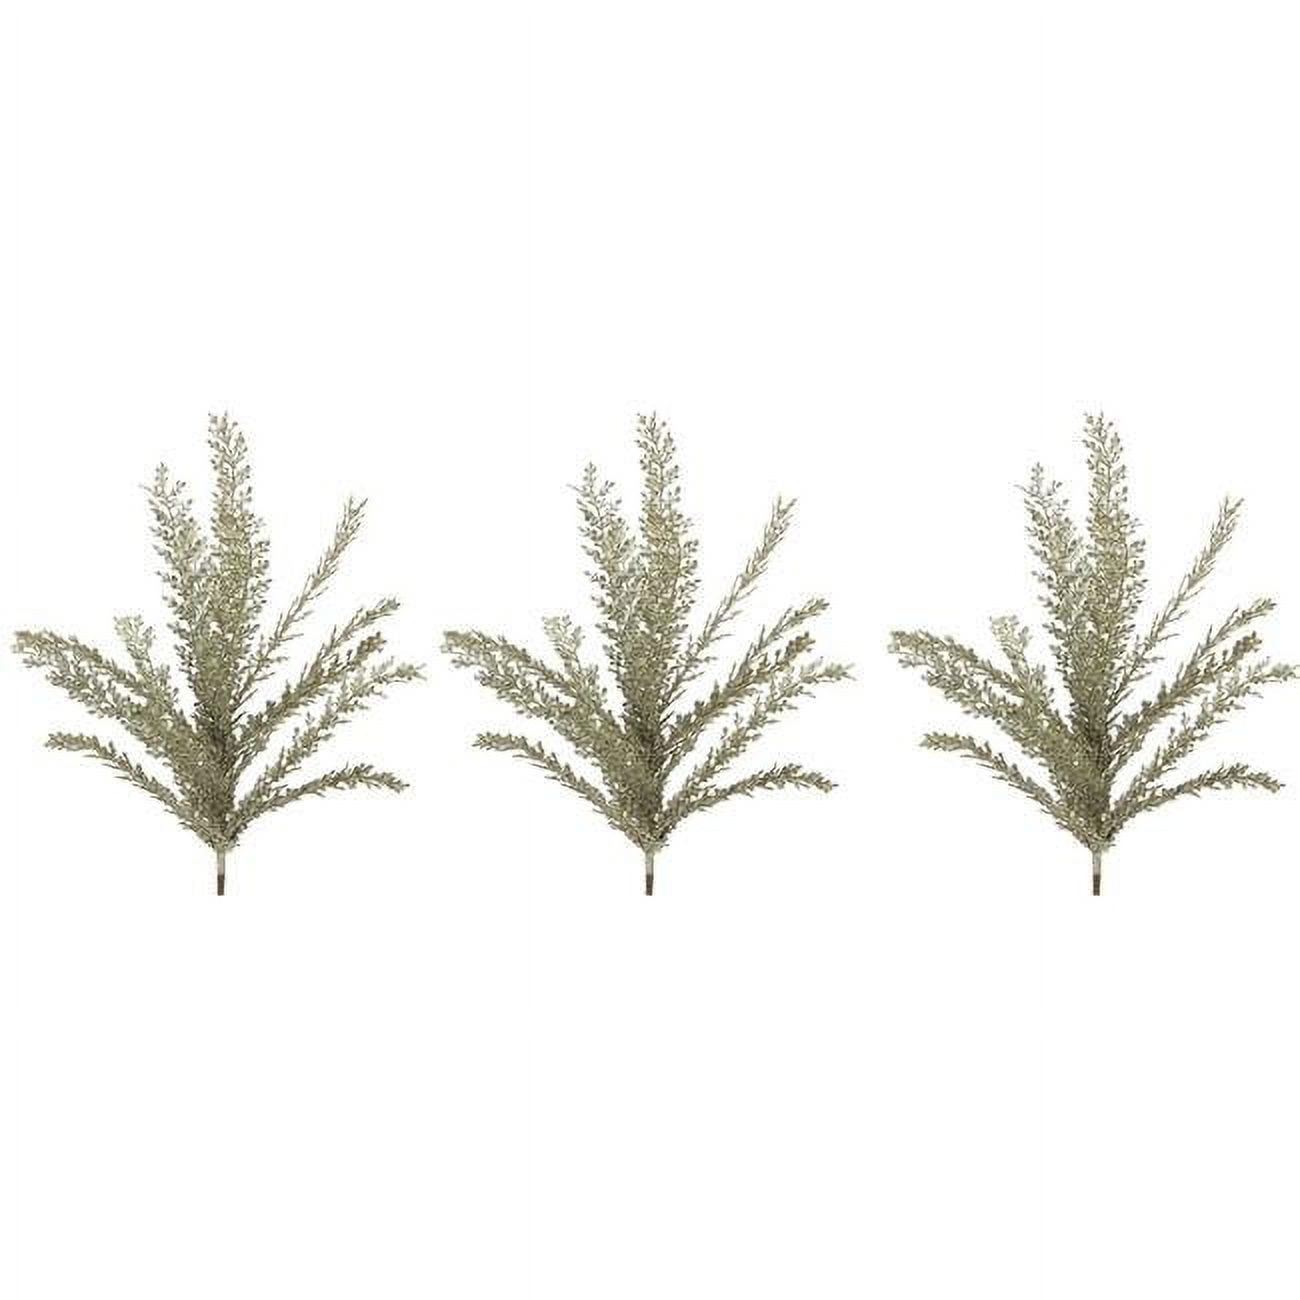 Admired By Nature Gxl7706-champagne-3 23 In. Glitter Filigree Leaf Spray Christmas Decor, Champagne - Set Of 3